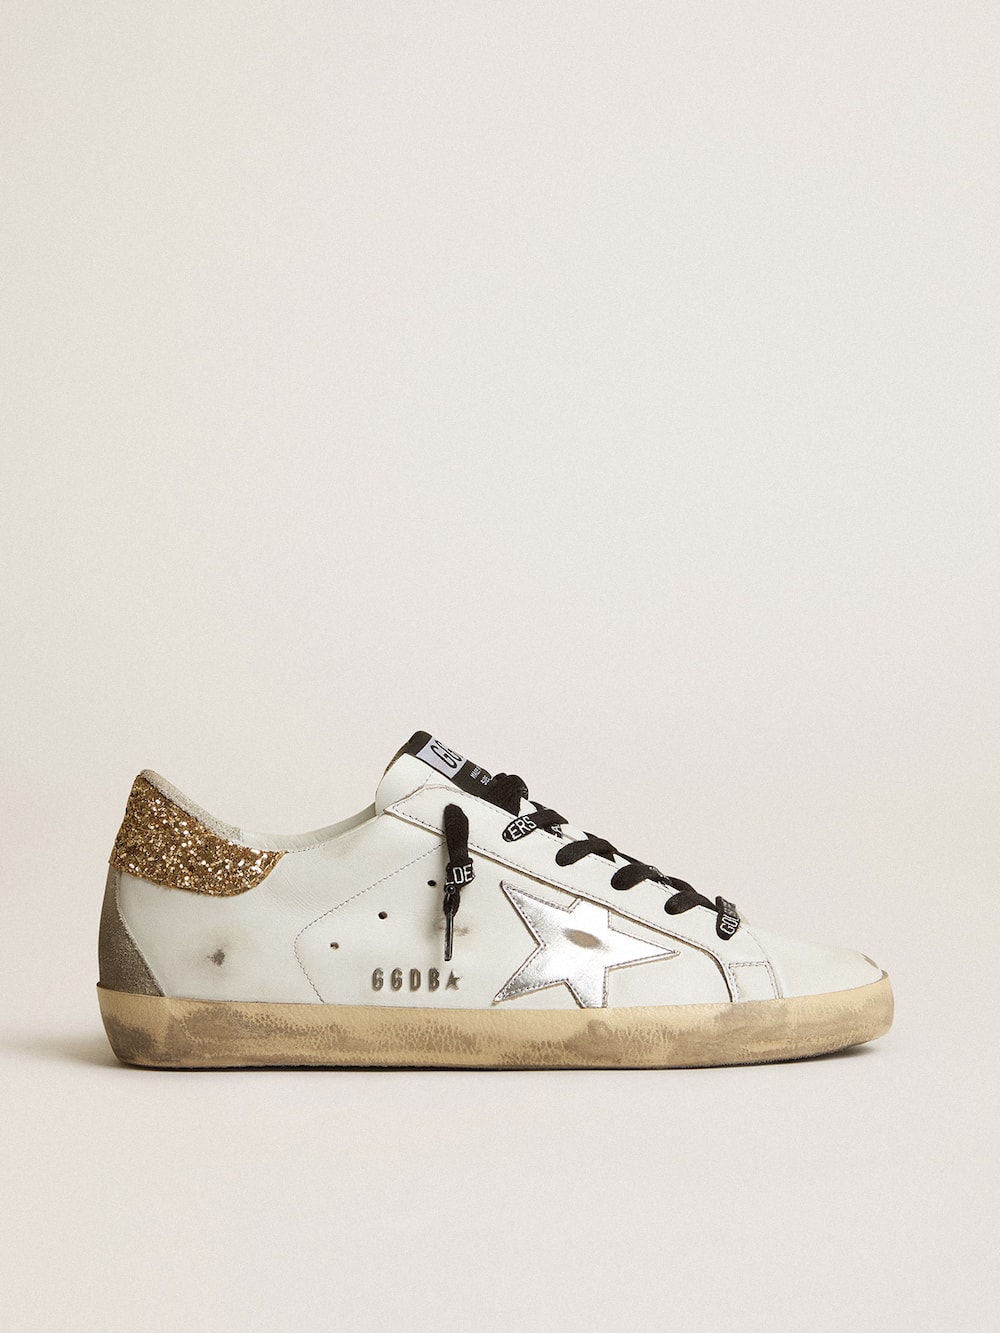 Golden Goose - Sneakers Super-Star Donna bianche in pelle con talloncino glitter in 